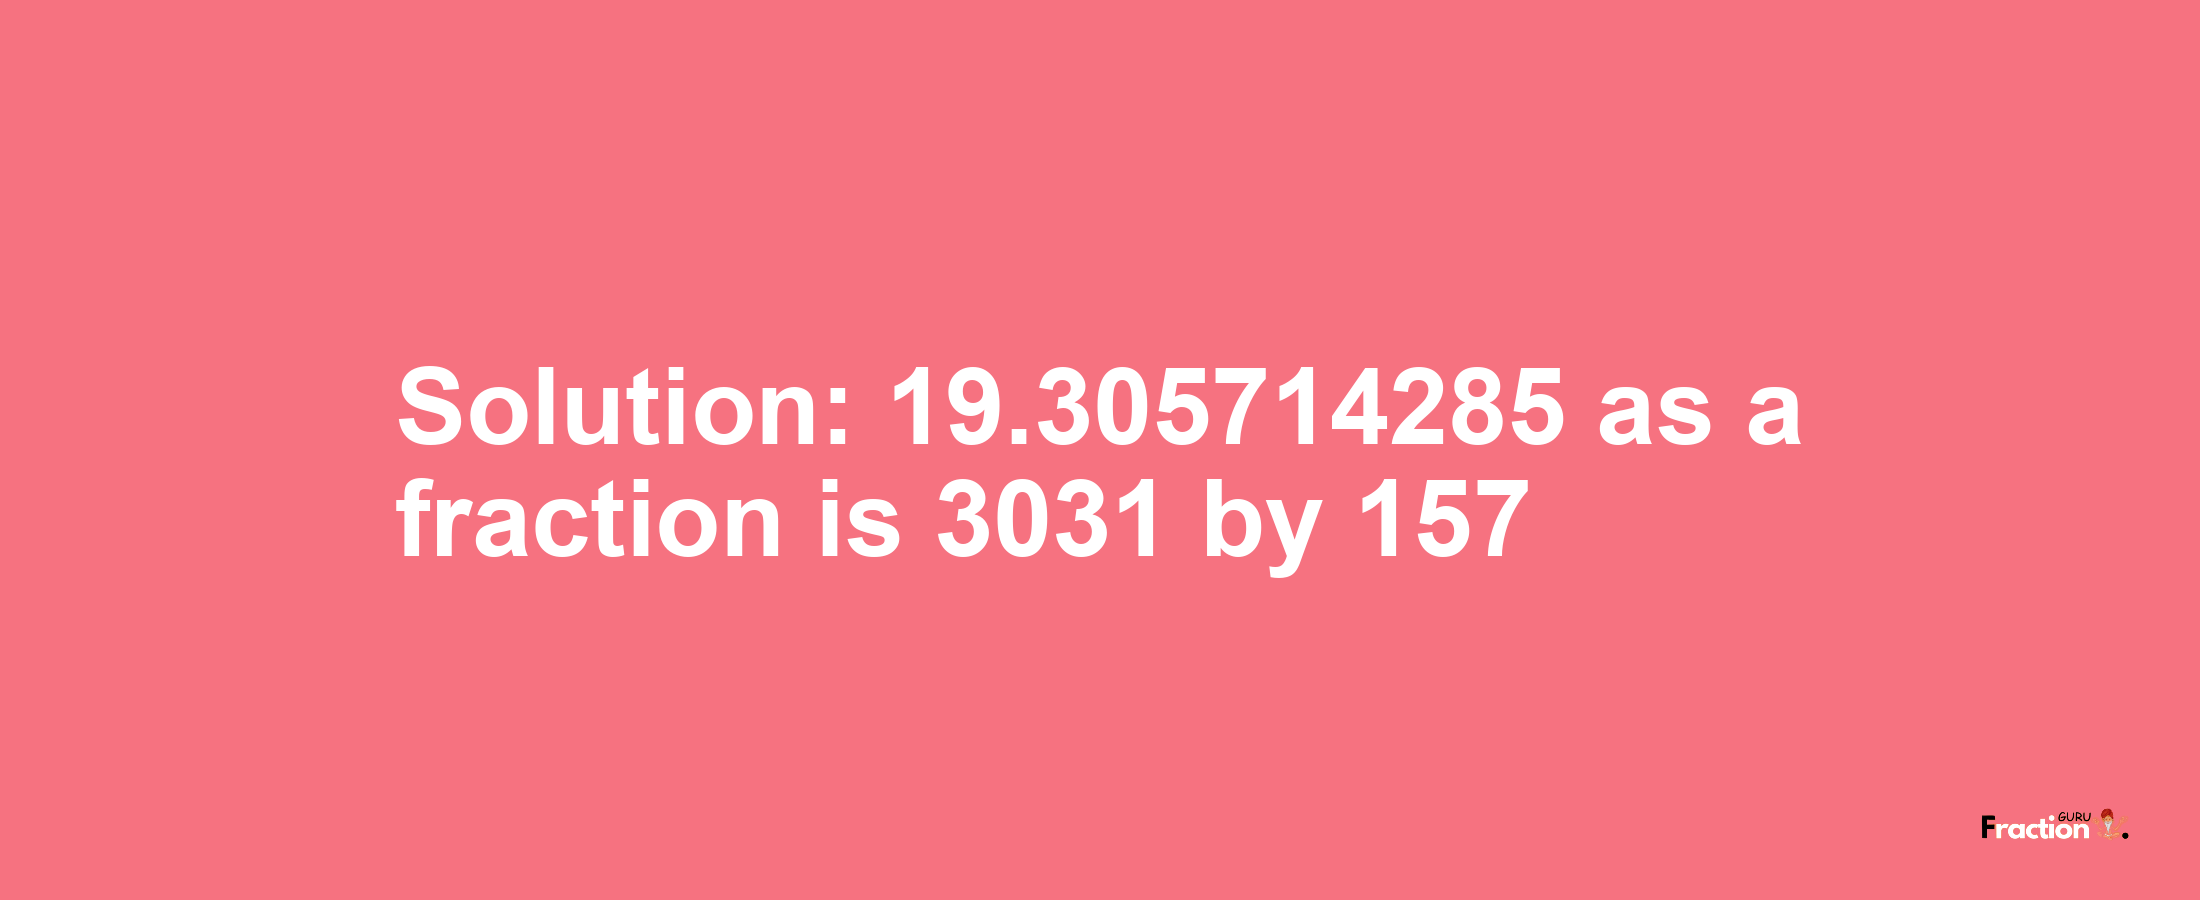 Solution:19.305714285 as a fraction is 3031/157